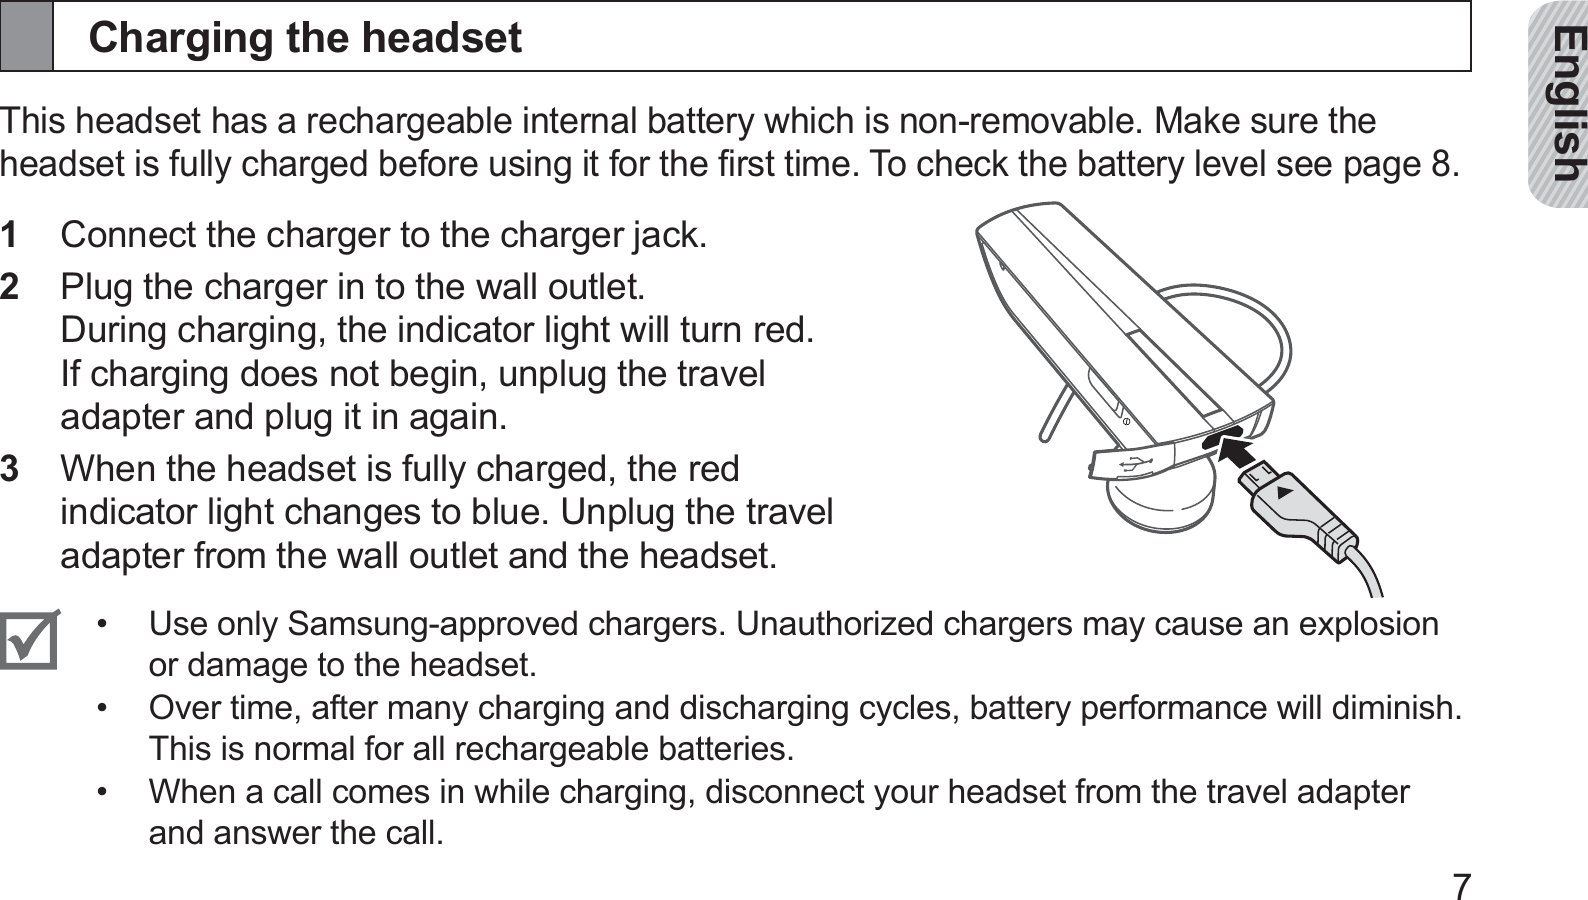 English7Charging the headsetThis headset has a rechargeable internal battery which is non-removable. Make sure the headset is fully charged before using it for the ﬁrst time. To check the battery level see page 8.Connect the charger to the charger jack.1 Plug the charger in to the wall outlet.  2 During charging, the indicator light will turn red. If charging does not begin, unplug the travel adapter and plug it in again.When the headset is fully charged, the red 3 indicator light changes to blue. Unplug the travel adapter from the wall outlet and the headset.Use only Samsung-approved chargers. Unauthorized chargers may cause an explosion • or damage to the headset. Over time, after many charging and discharging cycles, battery performance will diminish.  • This is normal for all rechargeable batteries.When a call comes in while charging, disconnect your headset from the travel adapter • and answer the call.